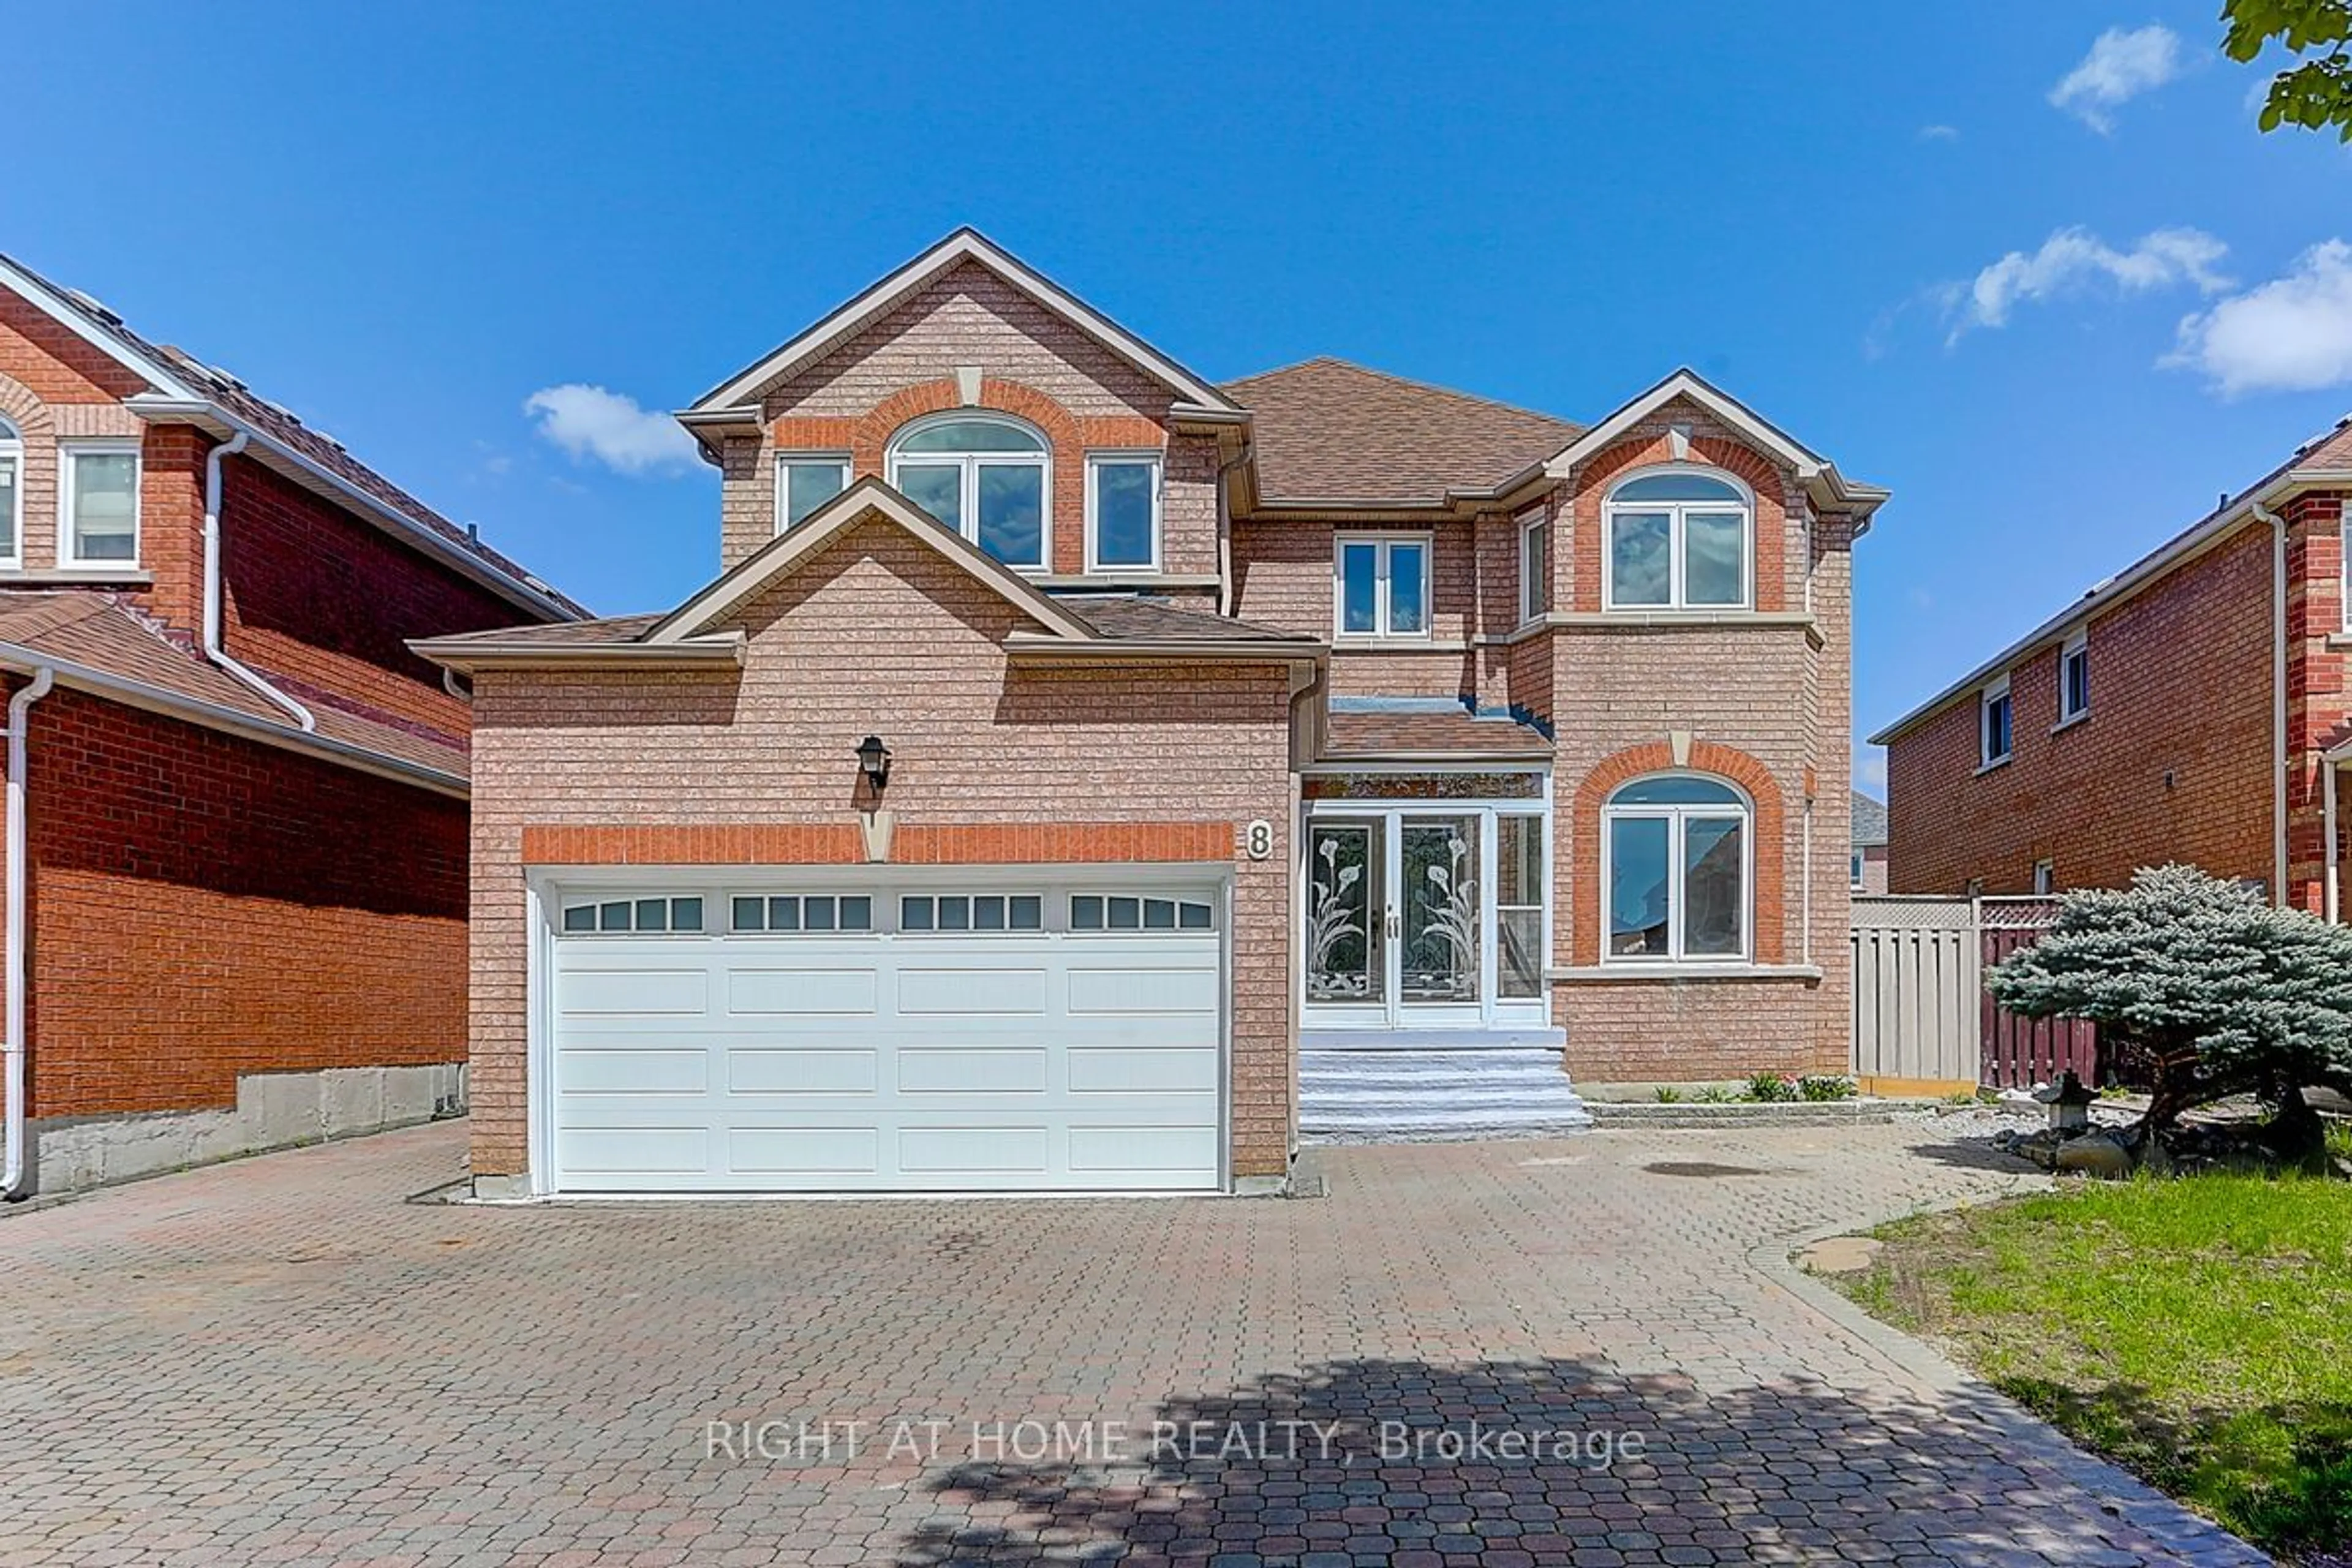 Home with brick exterior material for 8 Devonshire Ave, Markham Ontario L3S 1G5